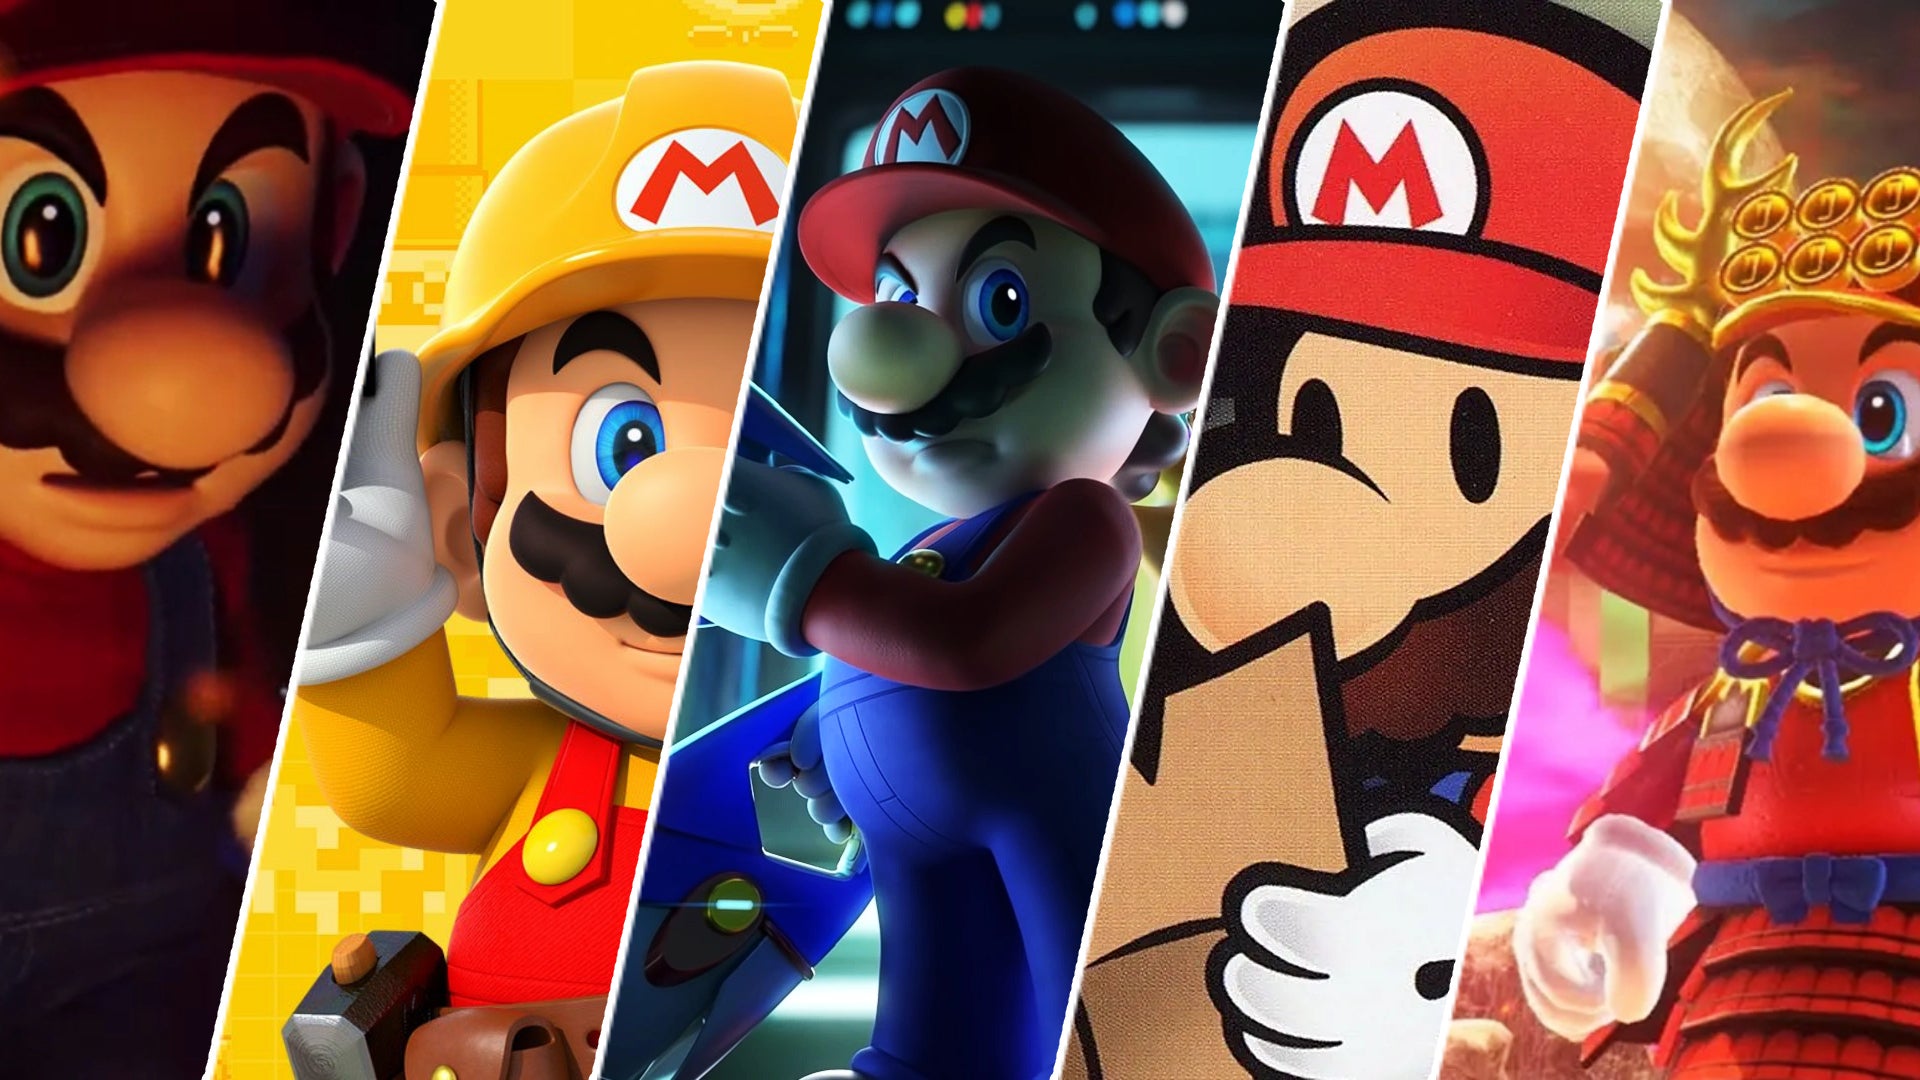 Image for Please, Nintendo, let Mario take on more mature genres